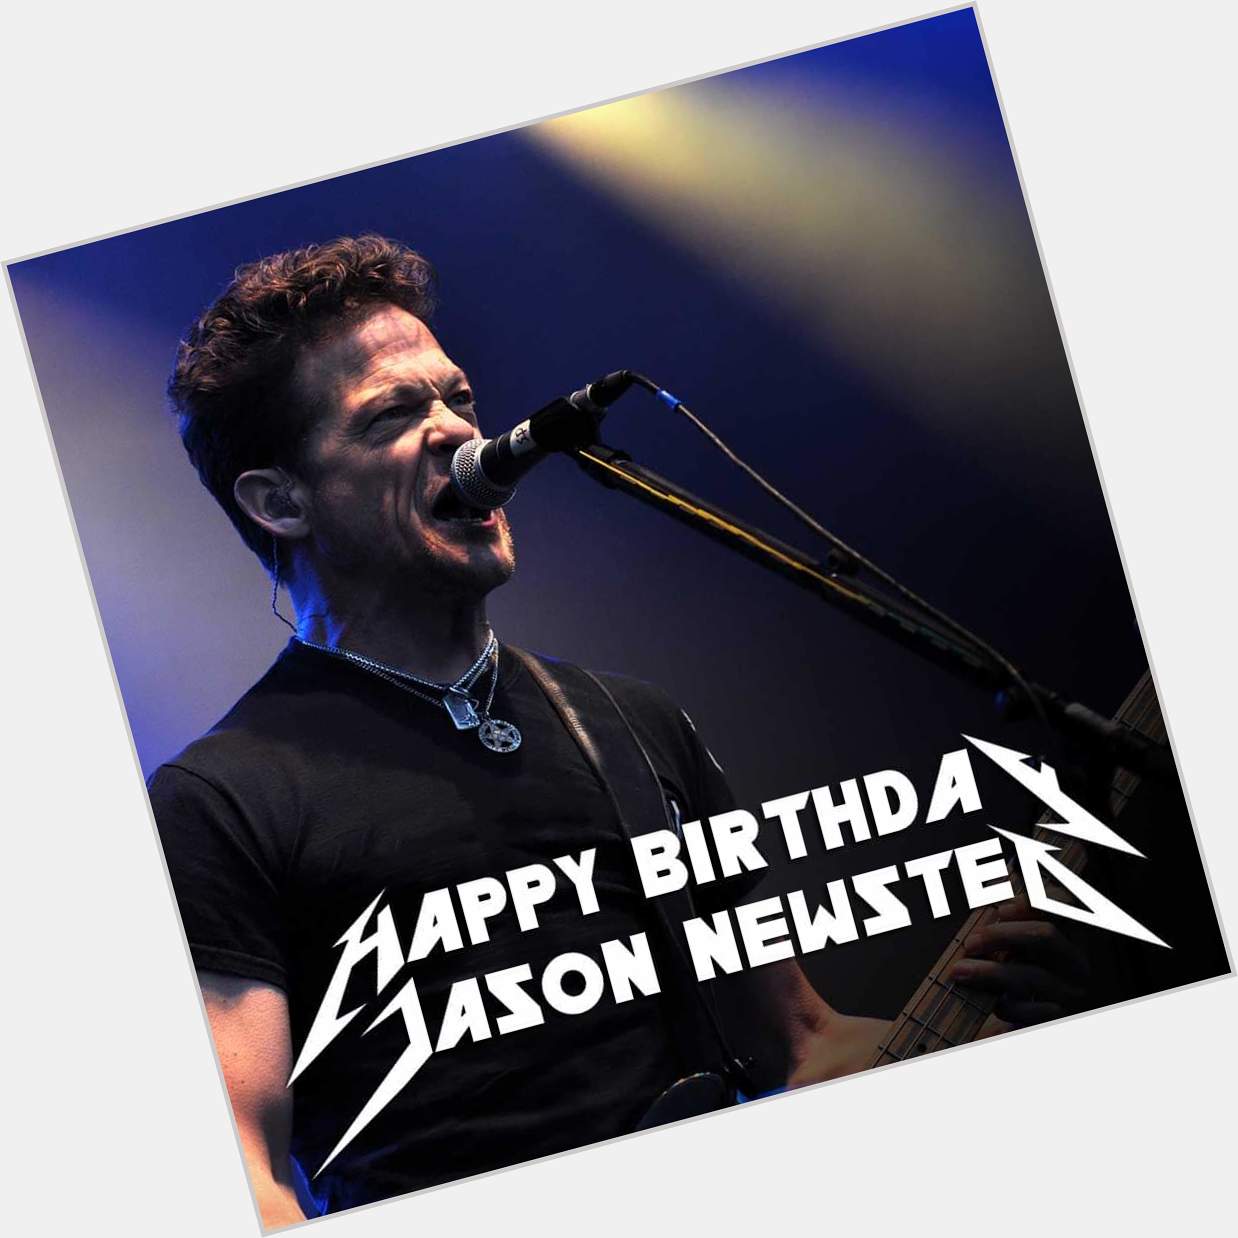 Happy 57th Birthday to Jason Newsted. The signed shirt is from the Summer Sanitarium 2000 Tour 